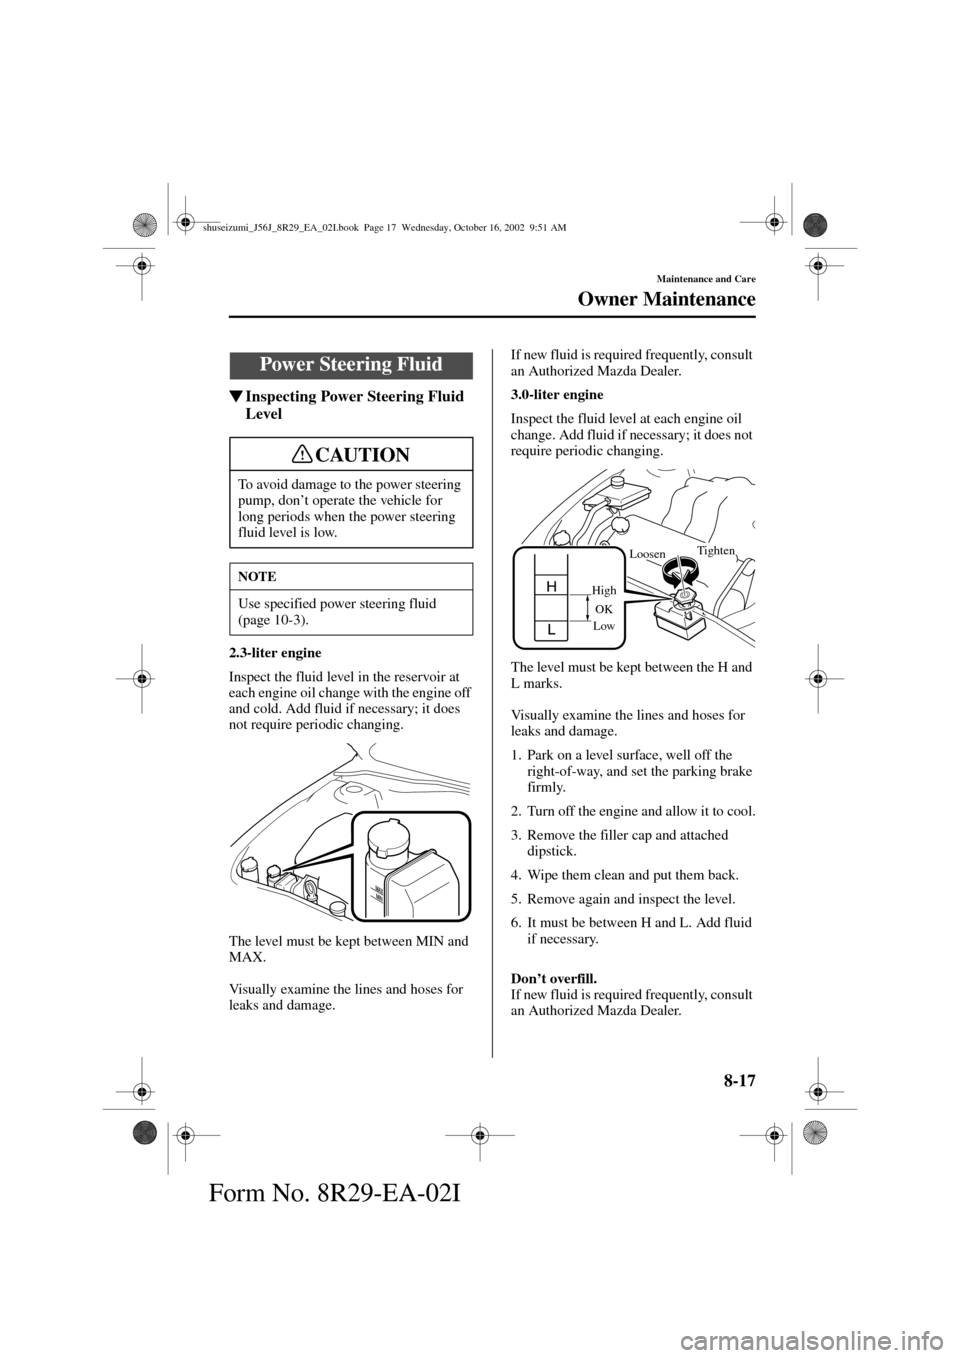 MAZDA MODEL 6 2003  Owners Manual (in English) 8-17
Maintenance and Care
Owner Maintenance
Form No. 8R29-EA-02I
Inspecting Power Steering Fluid 
Level
2.3-liter engine
Inspect the fluid level in the reservoir at 
each engine oil change with the e